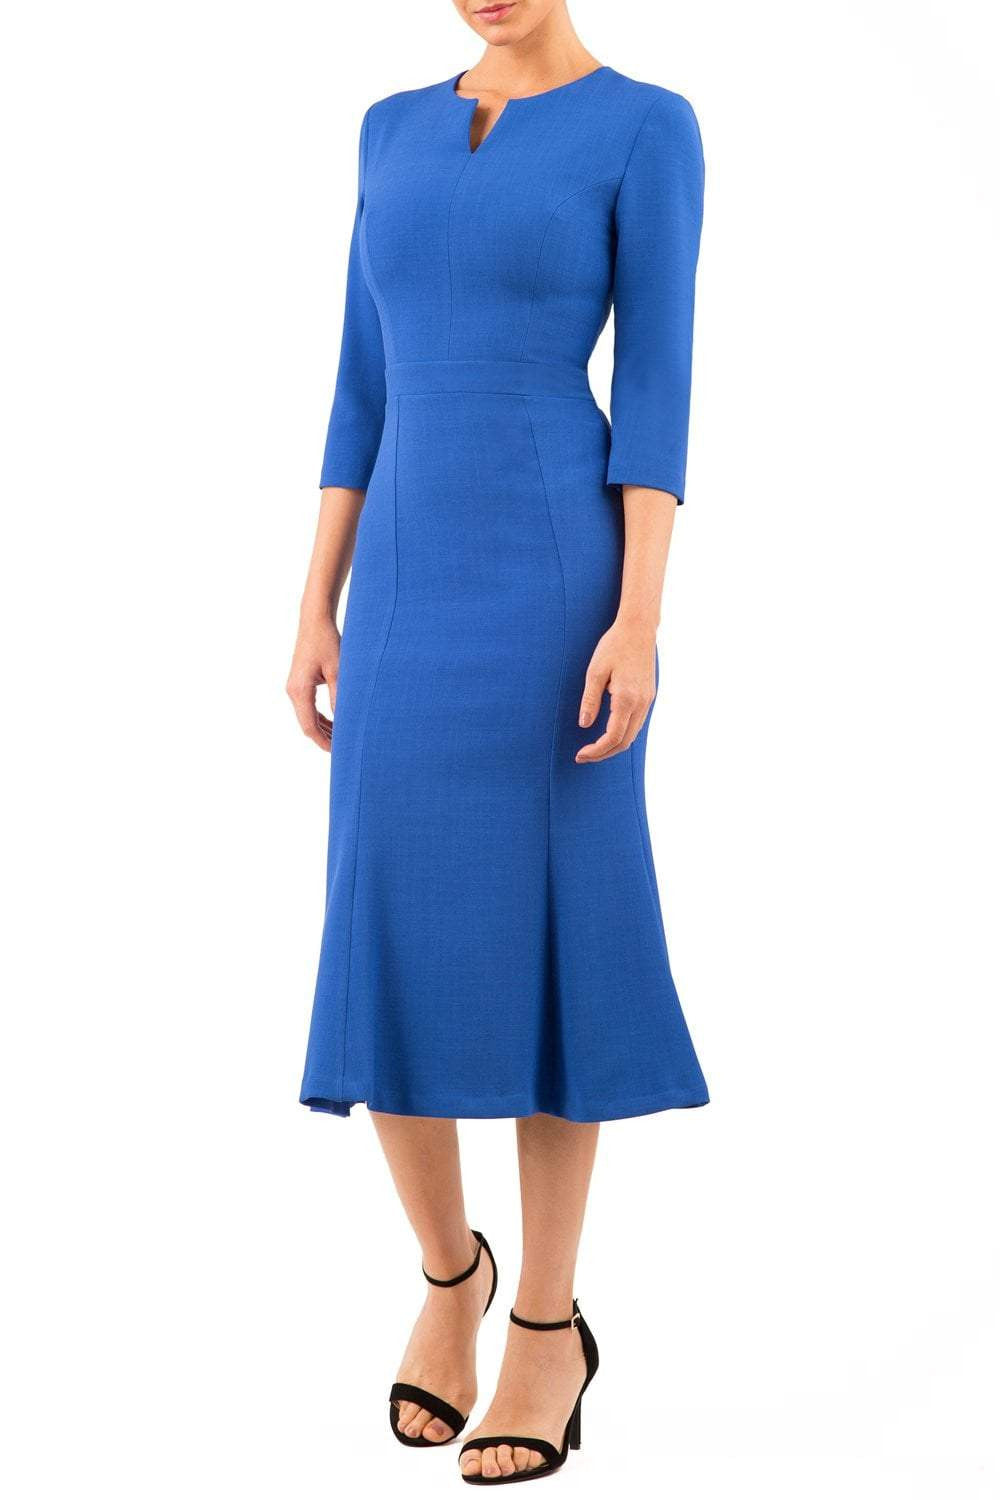 blonde model is wearing diva catwalk senne midaxi sleeved dress with fishtail and rounded neckline with a slit in the middle in royal blue front